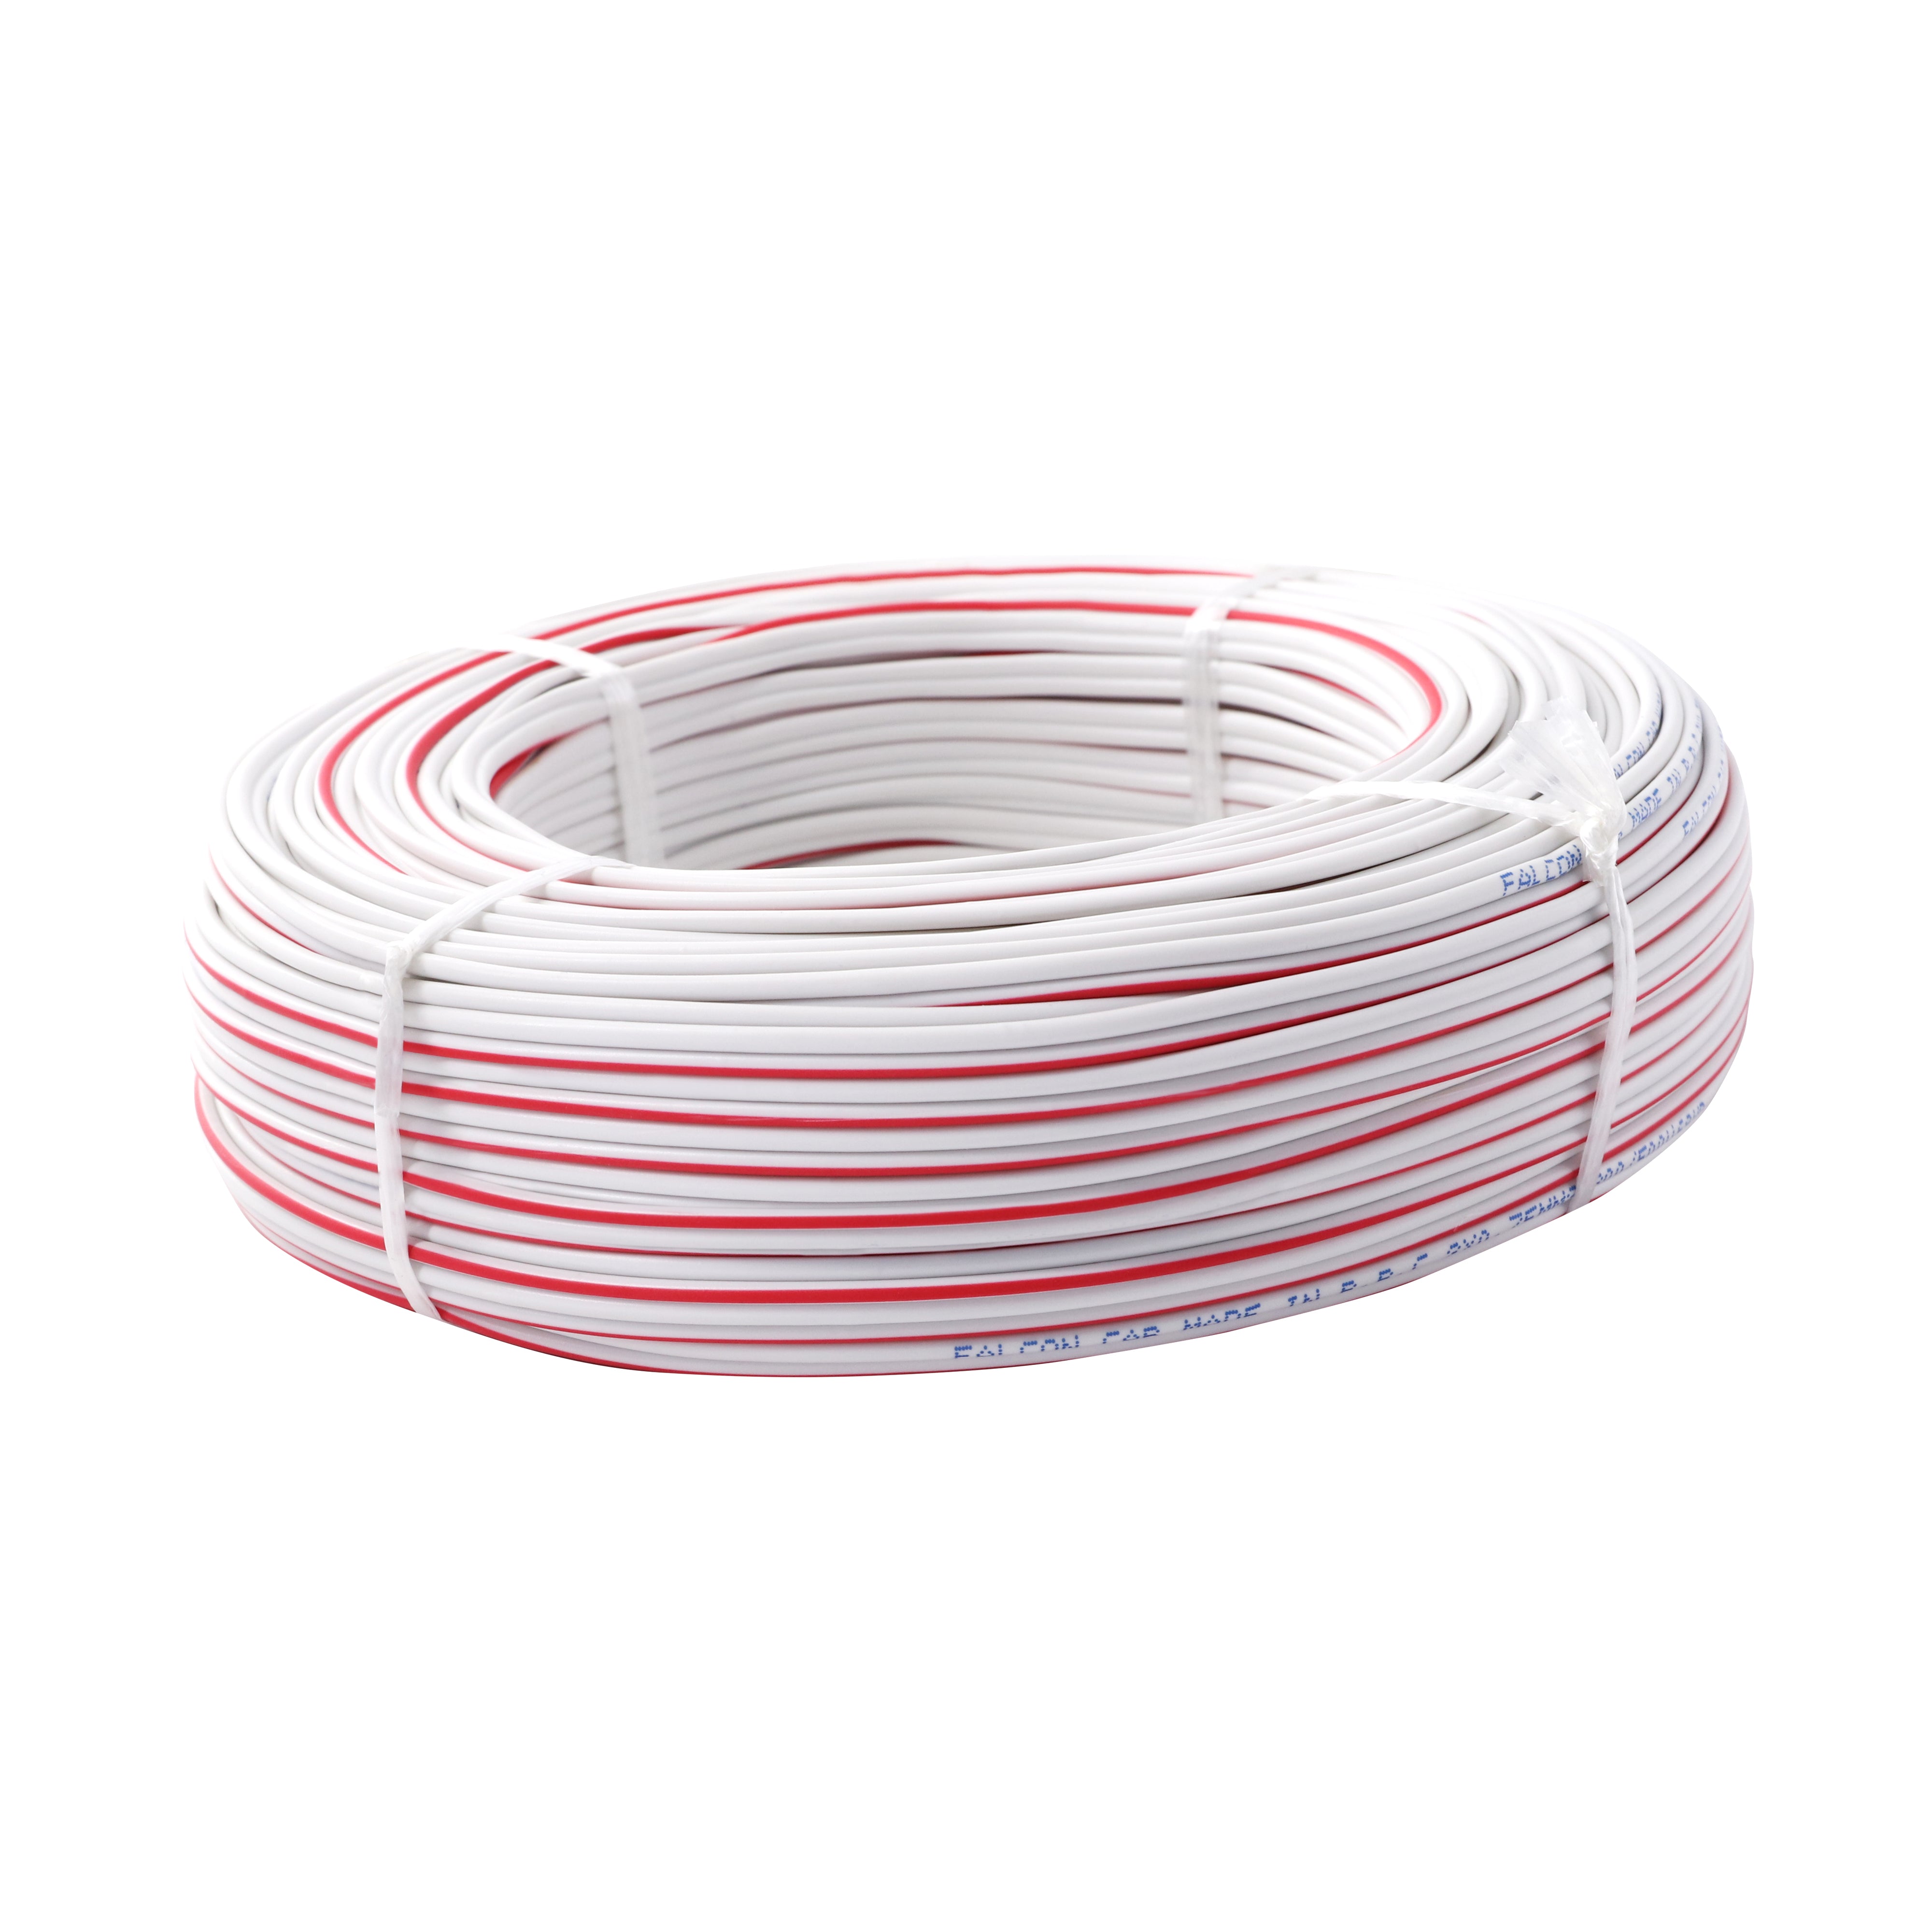 ZR-RVB  white and red wire-double wire